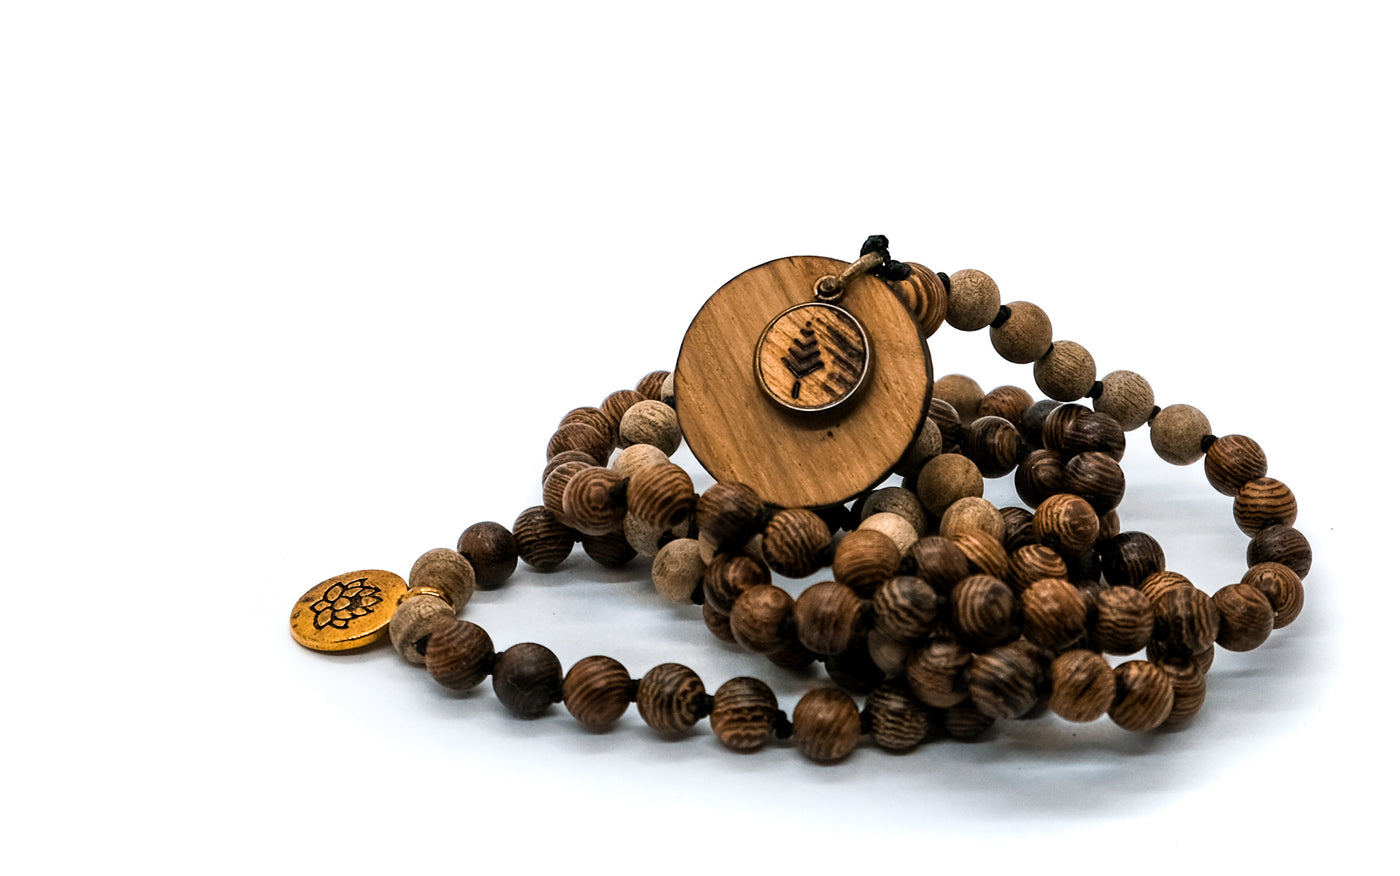 The 'Soothe' Mala